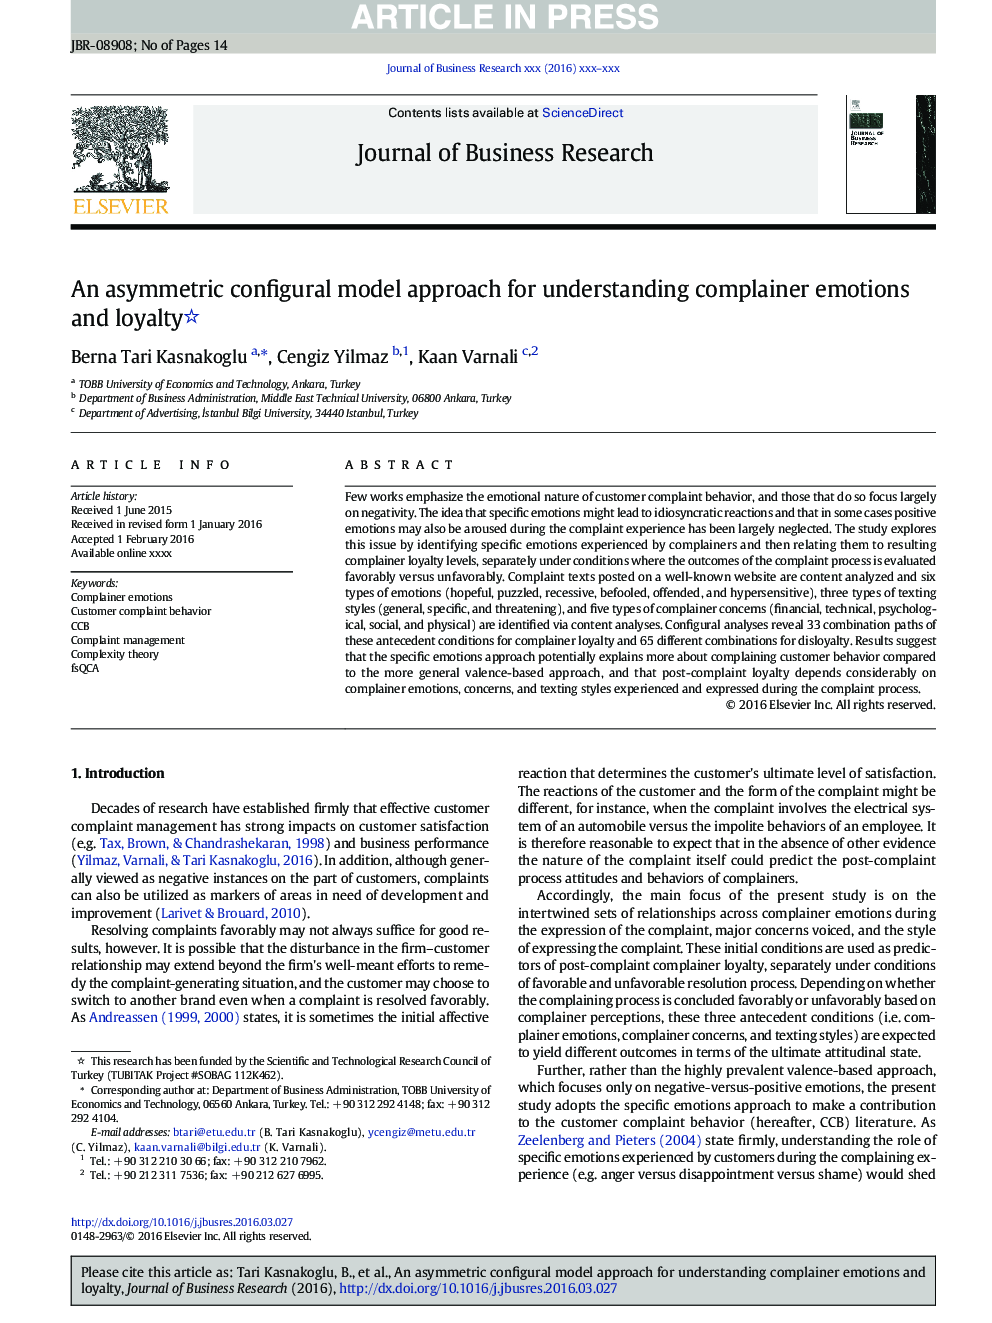 An asymmetric configural model approach for understanding complainer emotions and loyalty